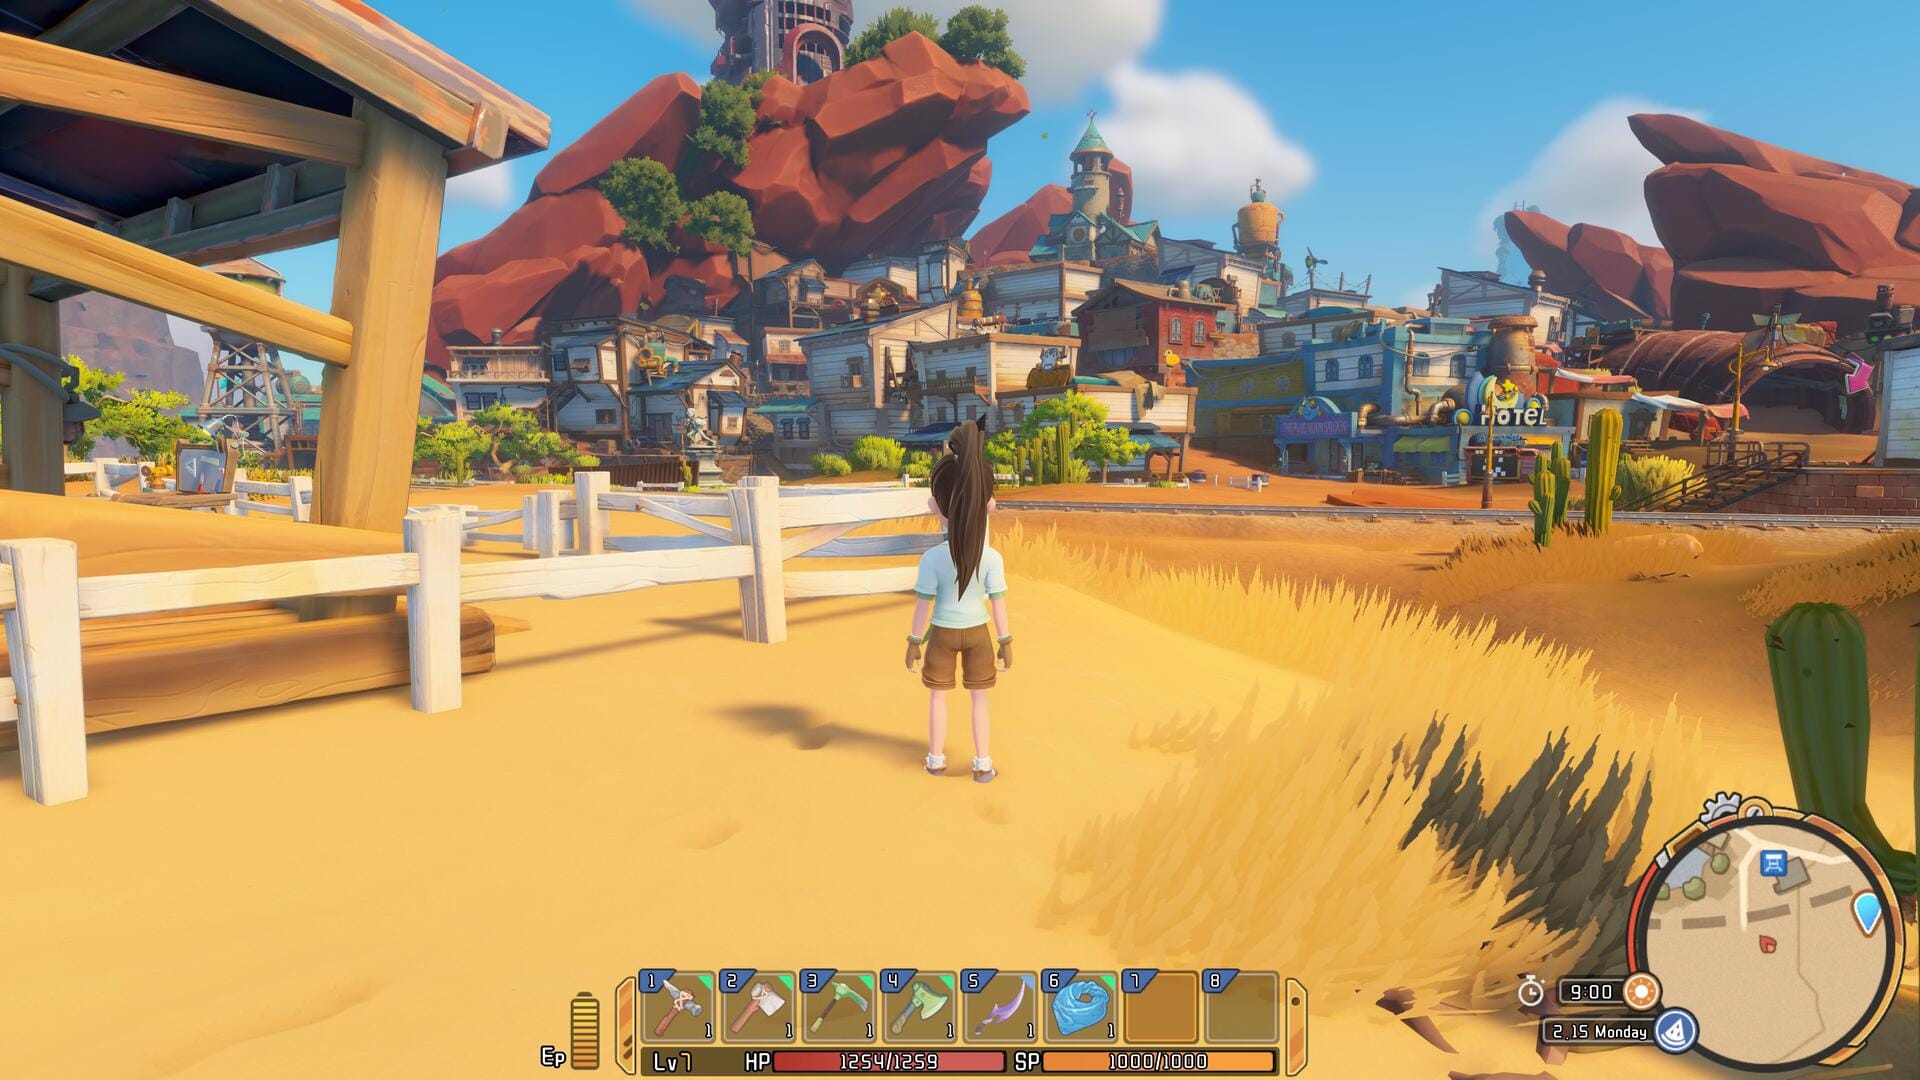 My Time at Portia Sequel My Time At Sandrock Revealed | TechRaptor